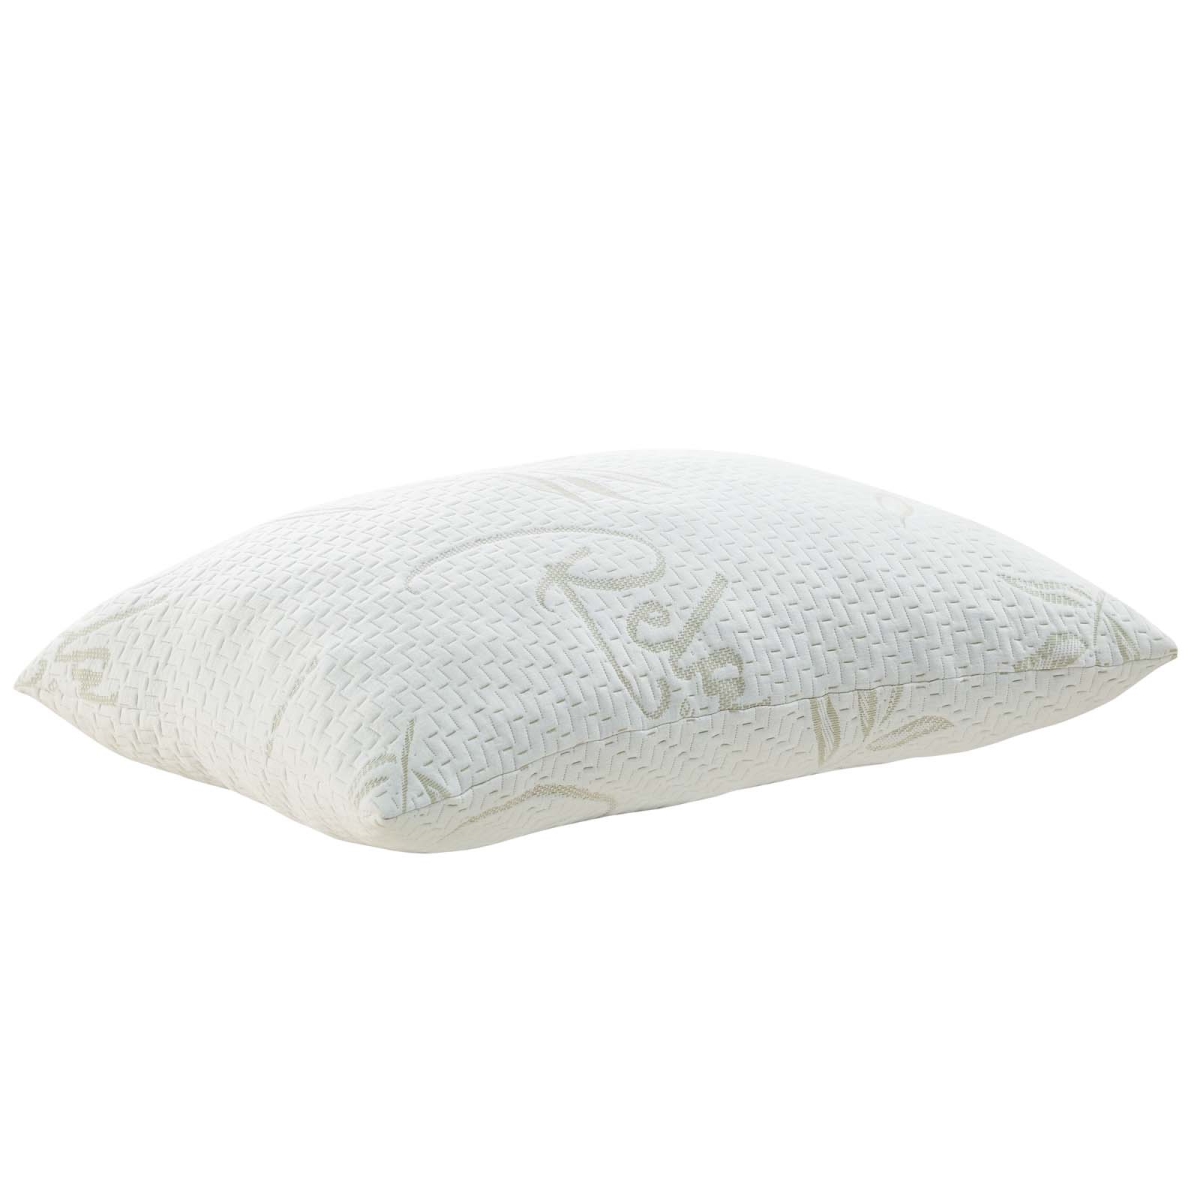 Picture of Modway MOD-5575-WHI 36.5 H x 60.5W x 81 L in. Relax Standard Queen Size Pillow, White